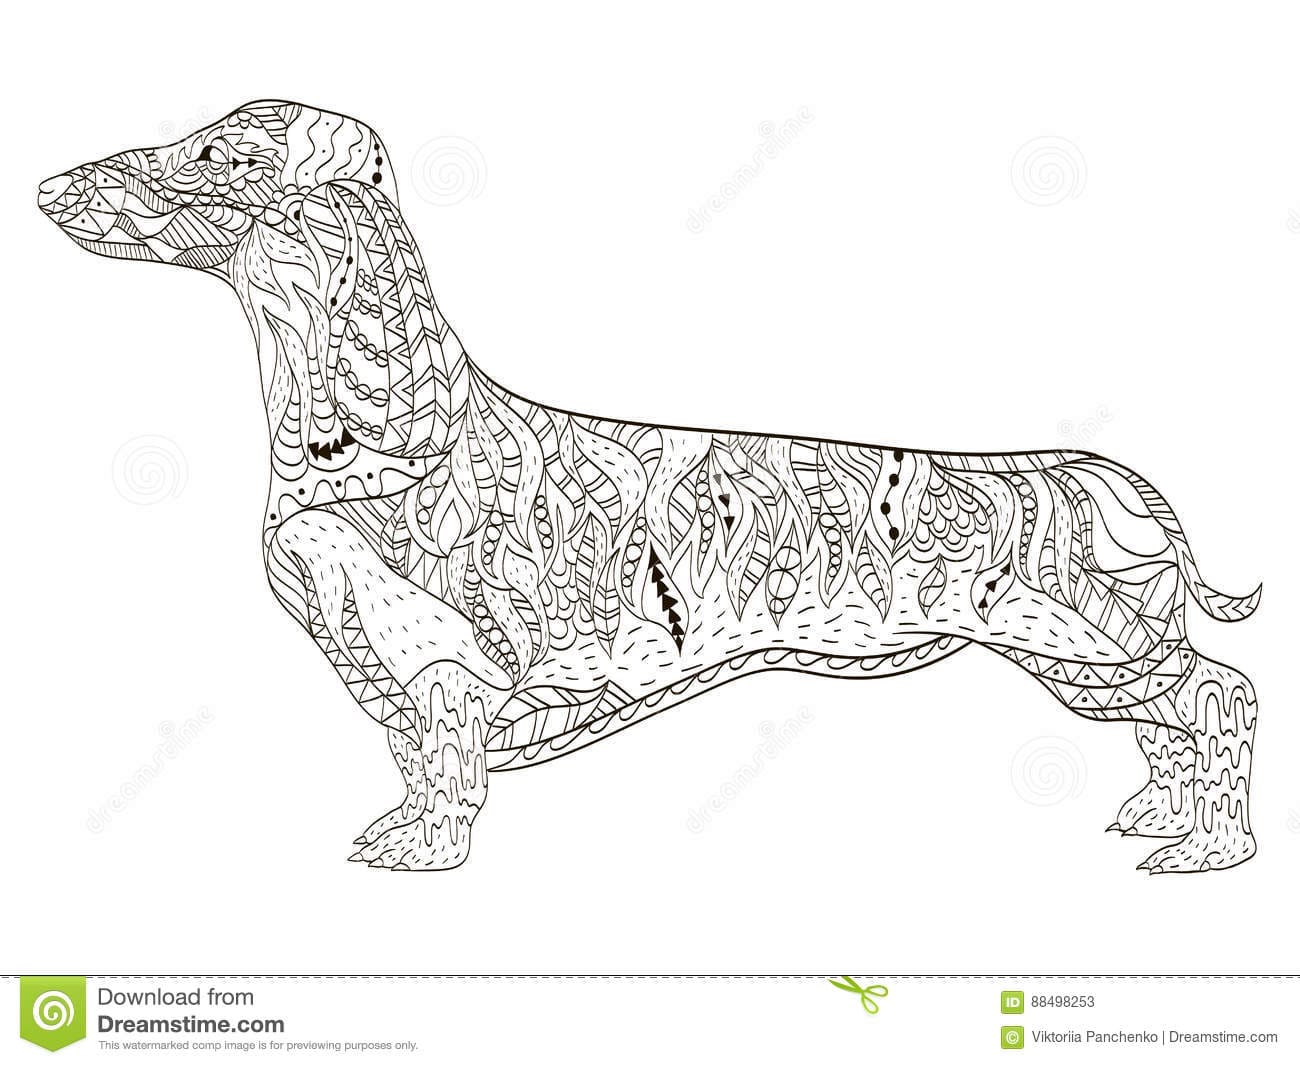 Dachshund Coloring Book For Adults Vector Coloring Page